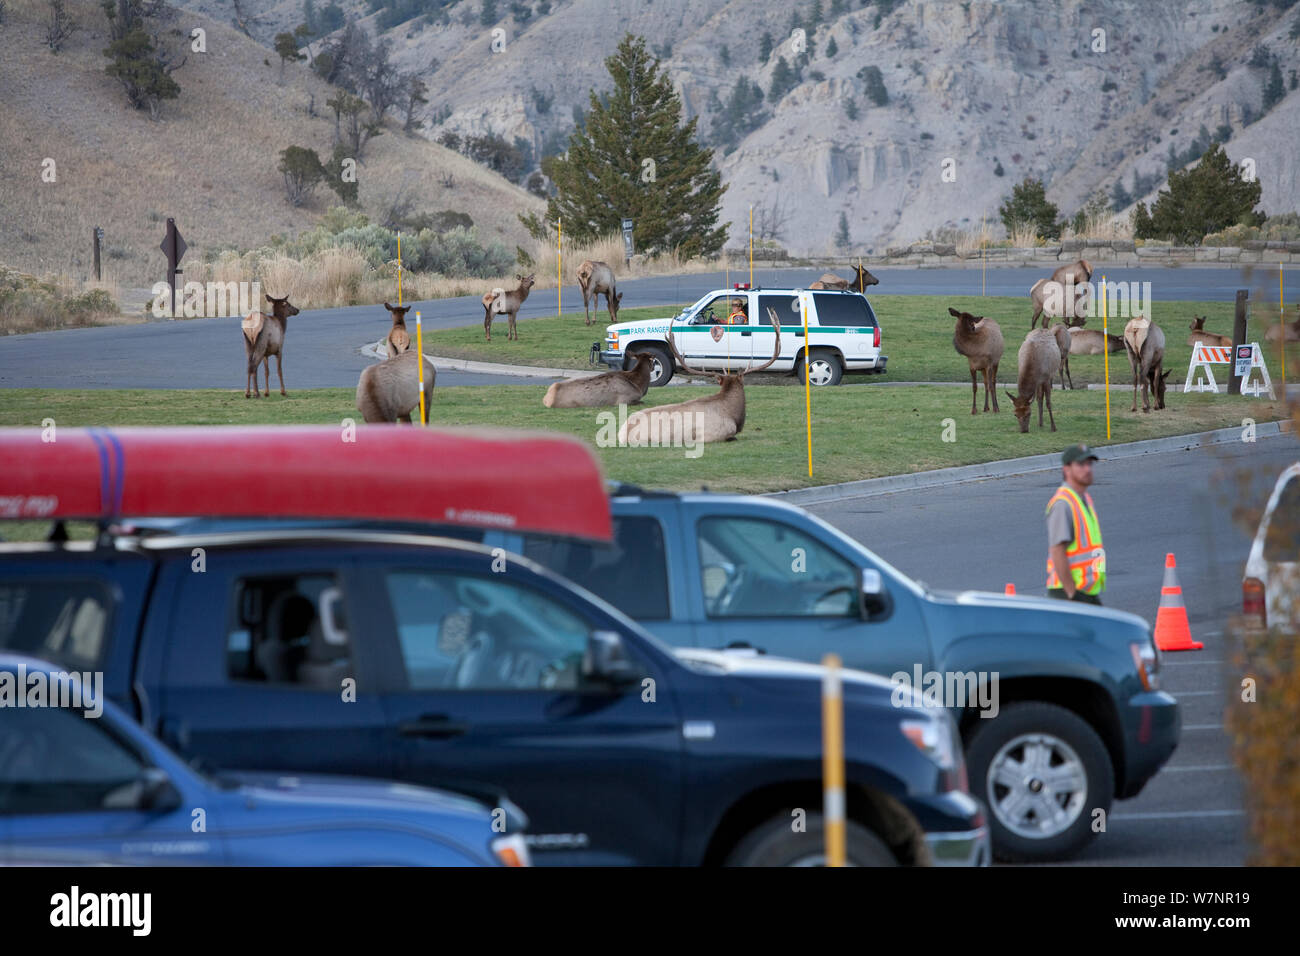 Elk (Cervus elaphus canadensis) grazing on lawn in town of Mammoth Hot Springs, Yellowstone National Park, USA Stock Photo